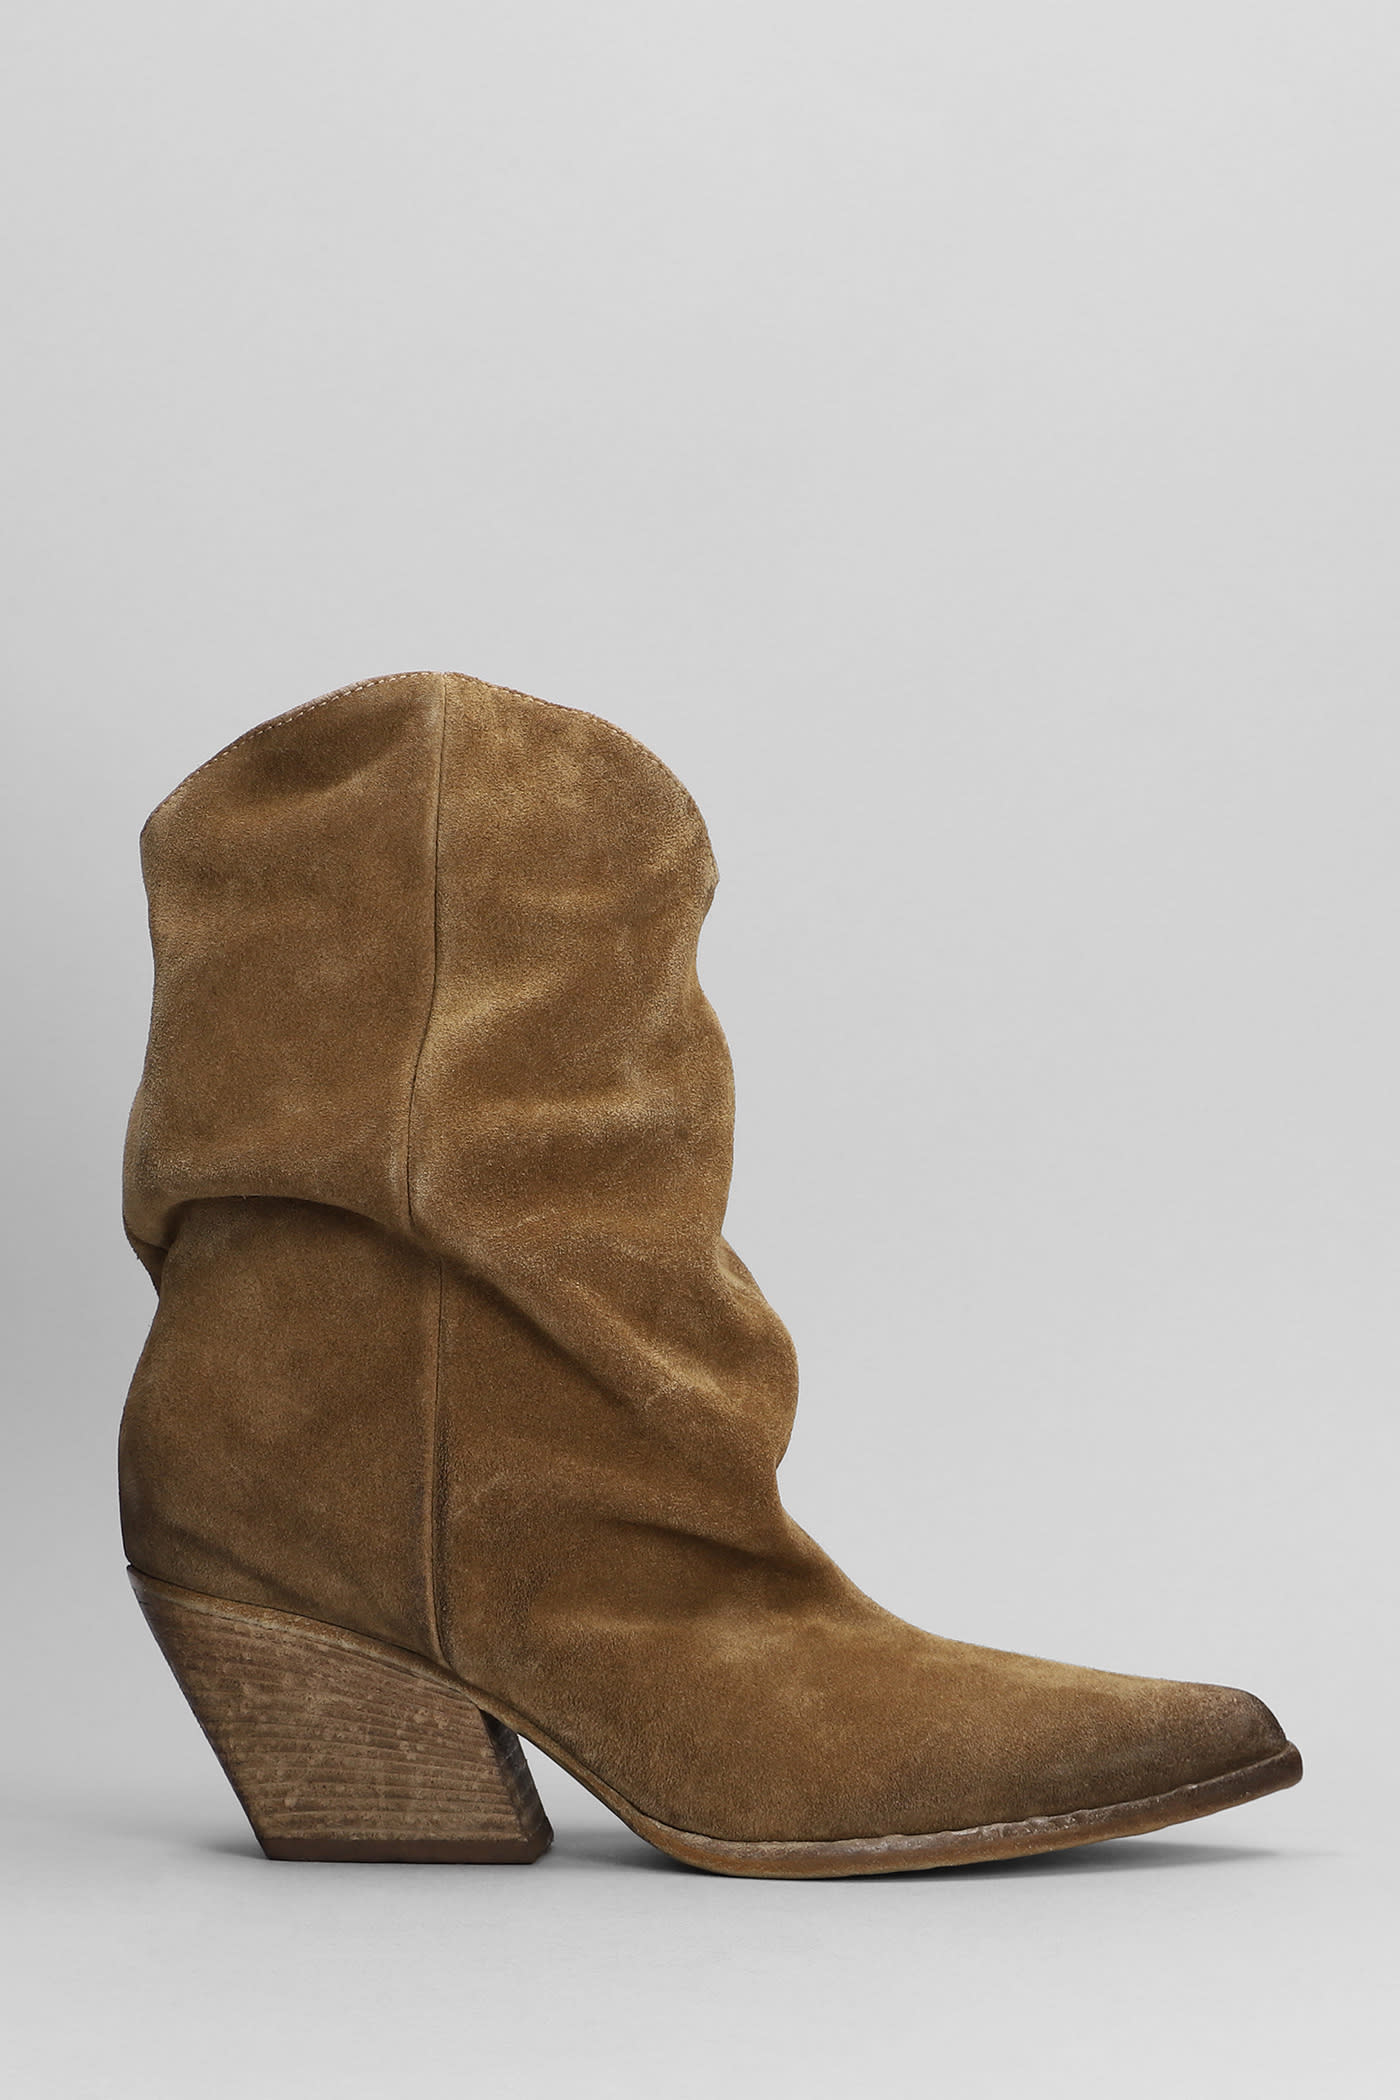 Low Heels Ankle Boots In Camel Suede